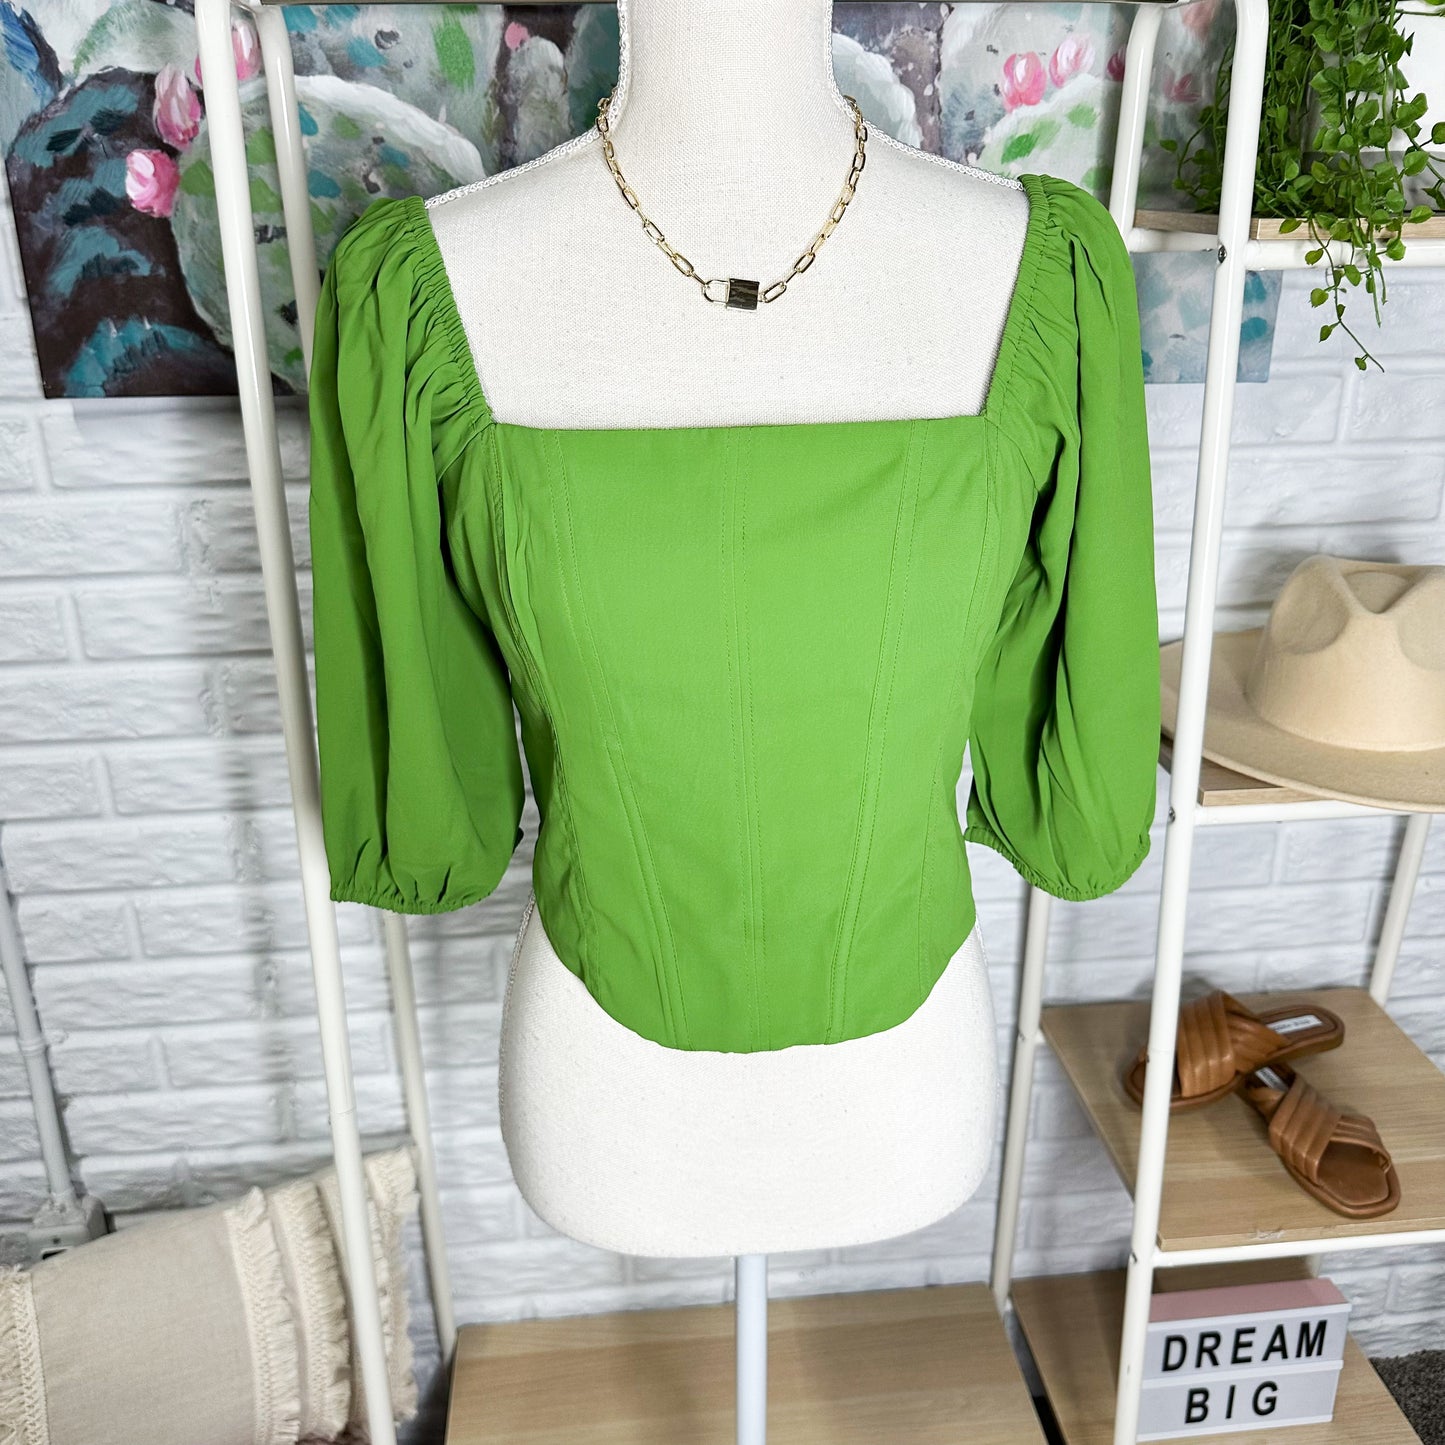 Abercrombie & Fitch New Green Puff Sleeve Corset top Size Medium